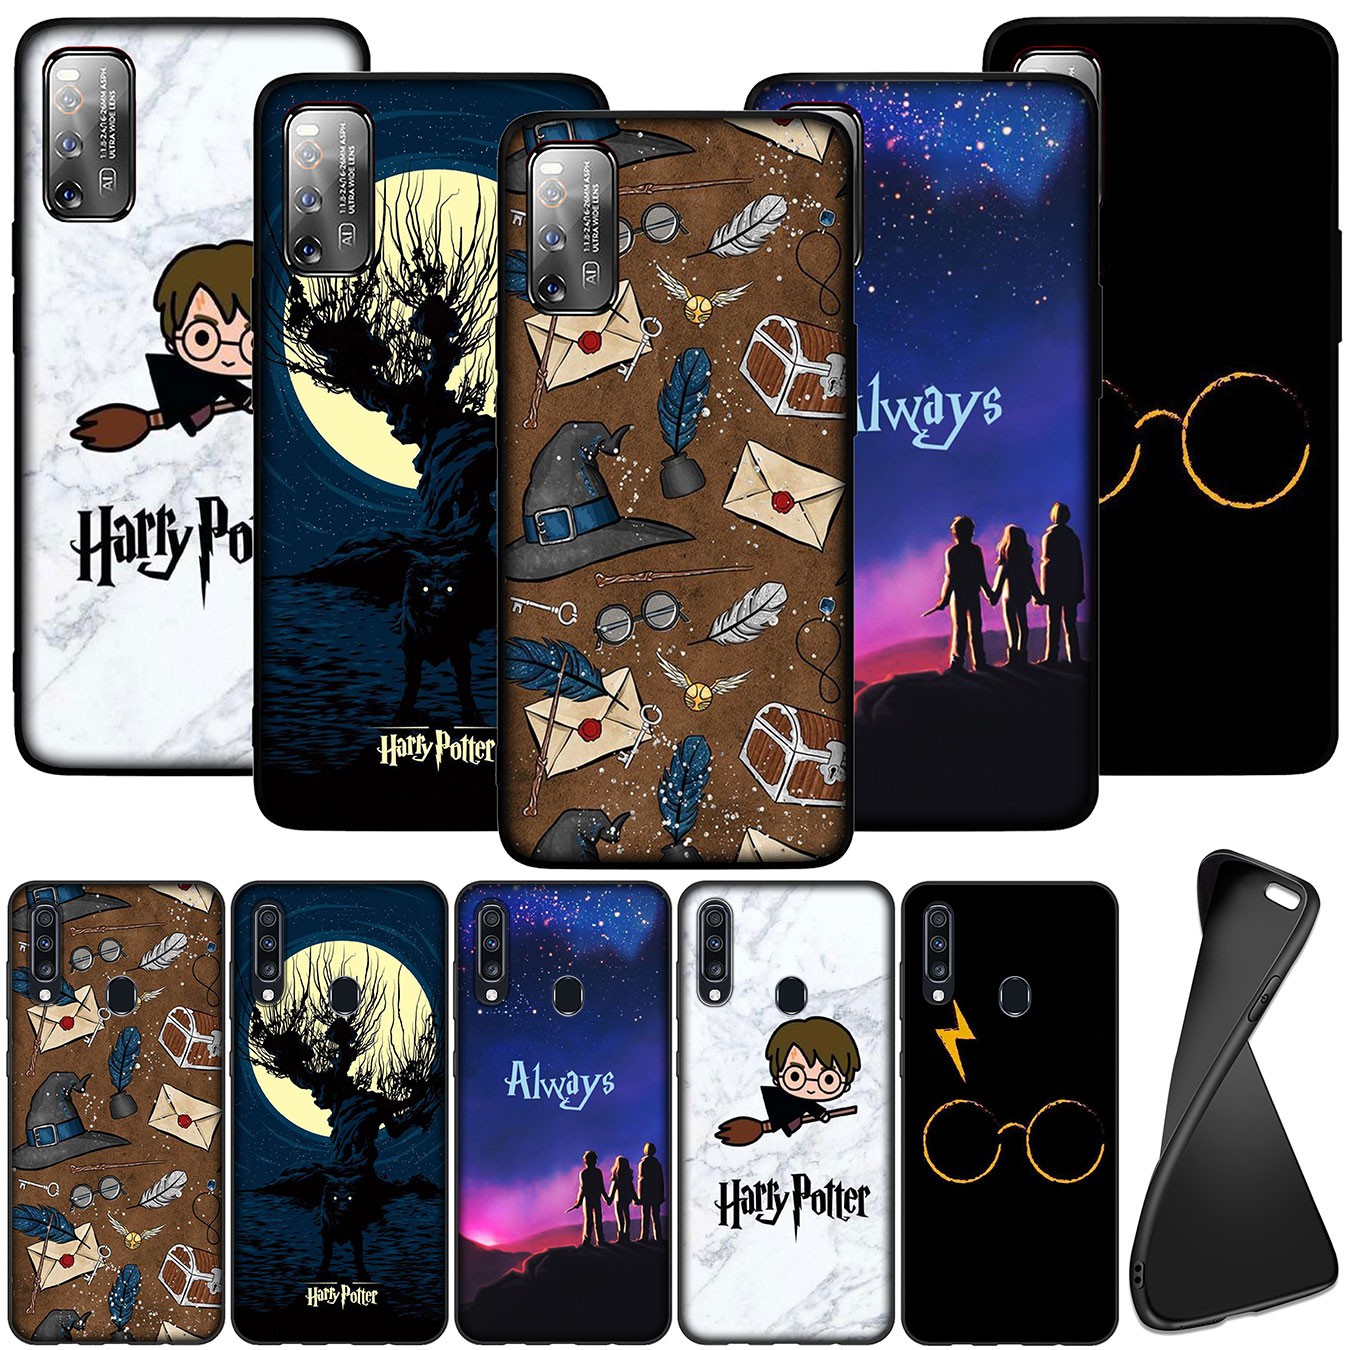 Ốp Lưng Silicone In Hình Harry Potter Cho Xiaomi Redmi Note 9 / 7 Pro / 9a / 7a / 9c / Note7 / Note9 / 9pro / 7pro